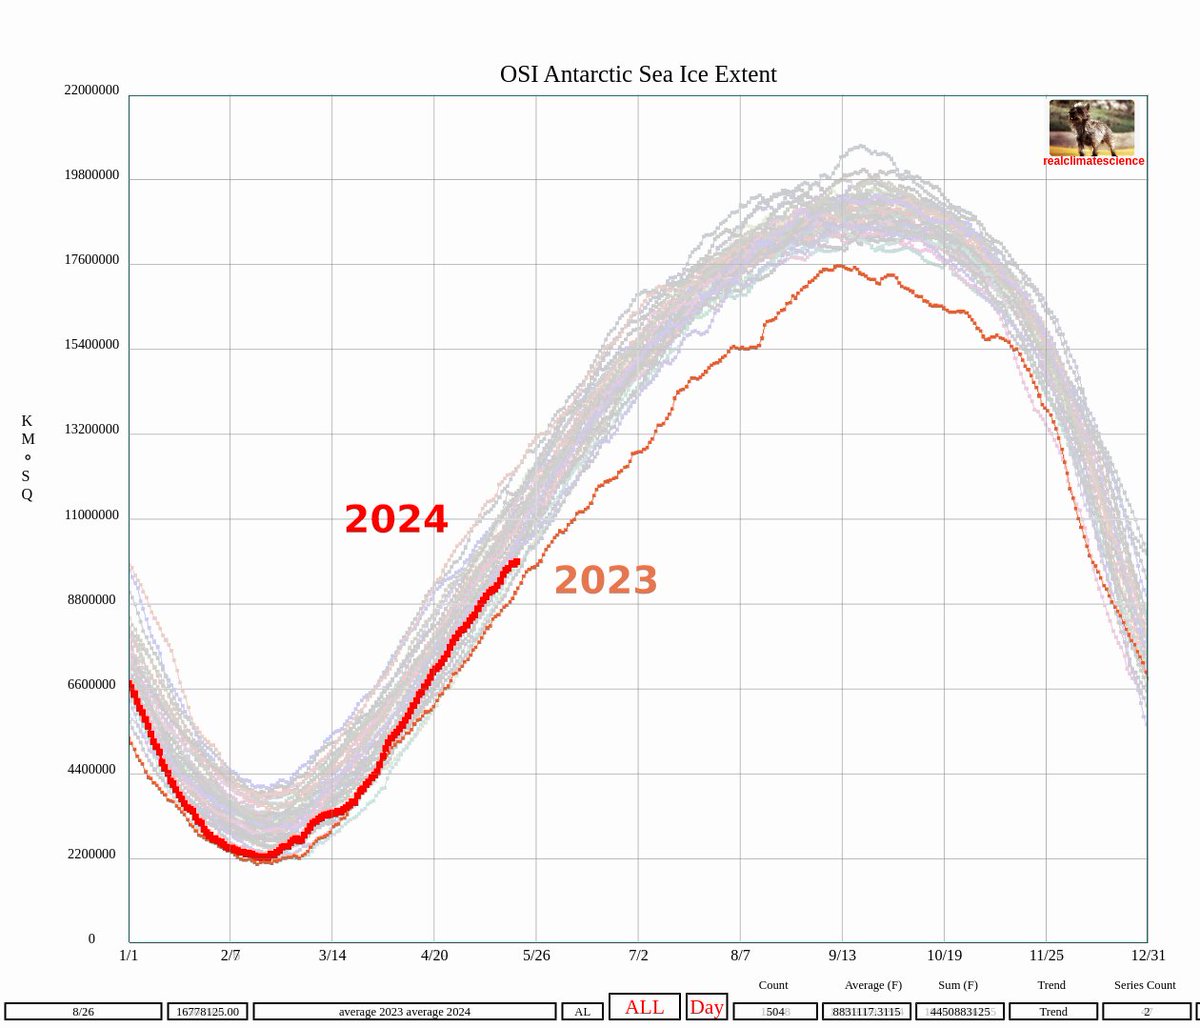 The ice has already recovered. But thanks for the reminder that #ClimateScam forecasts and attribution are propaganda - not science. ftp://osisaf.met.no/prod_test/ice/index/v2p2/sh/osisaf_sh_sie_daily.txt